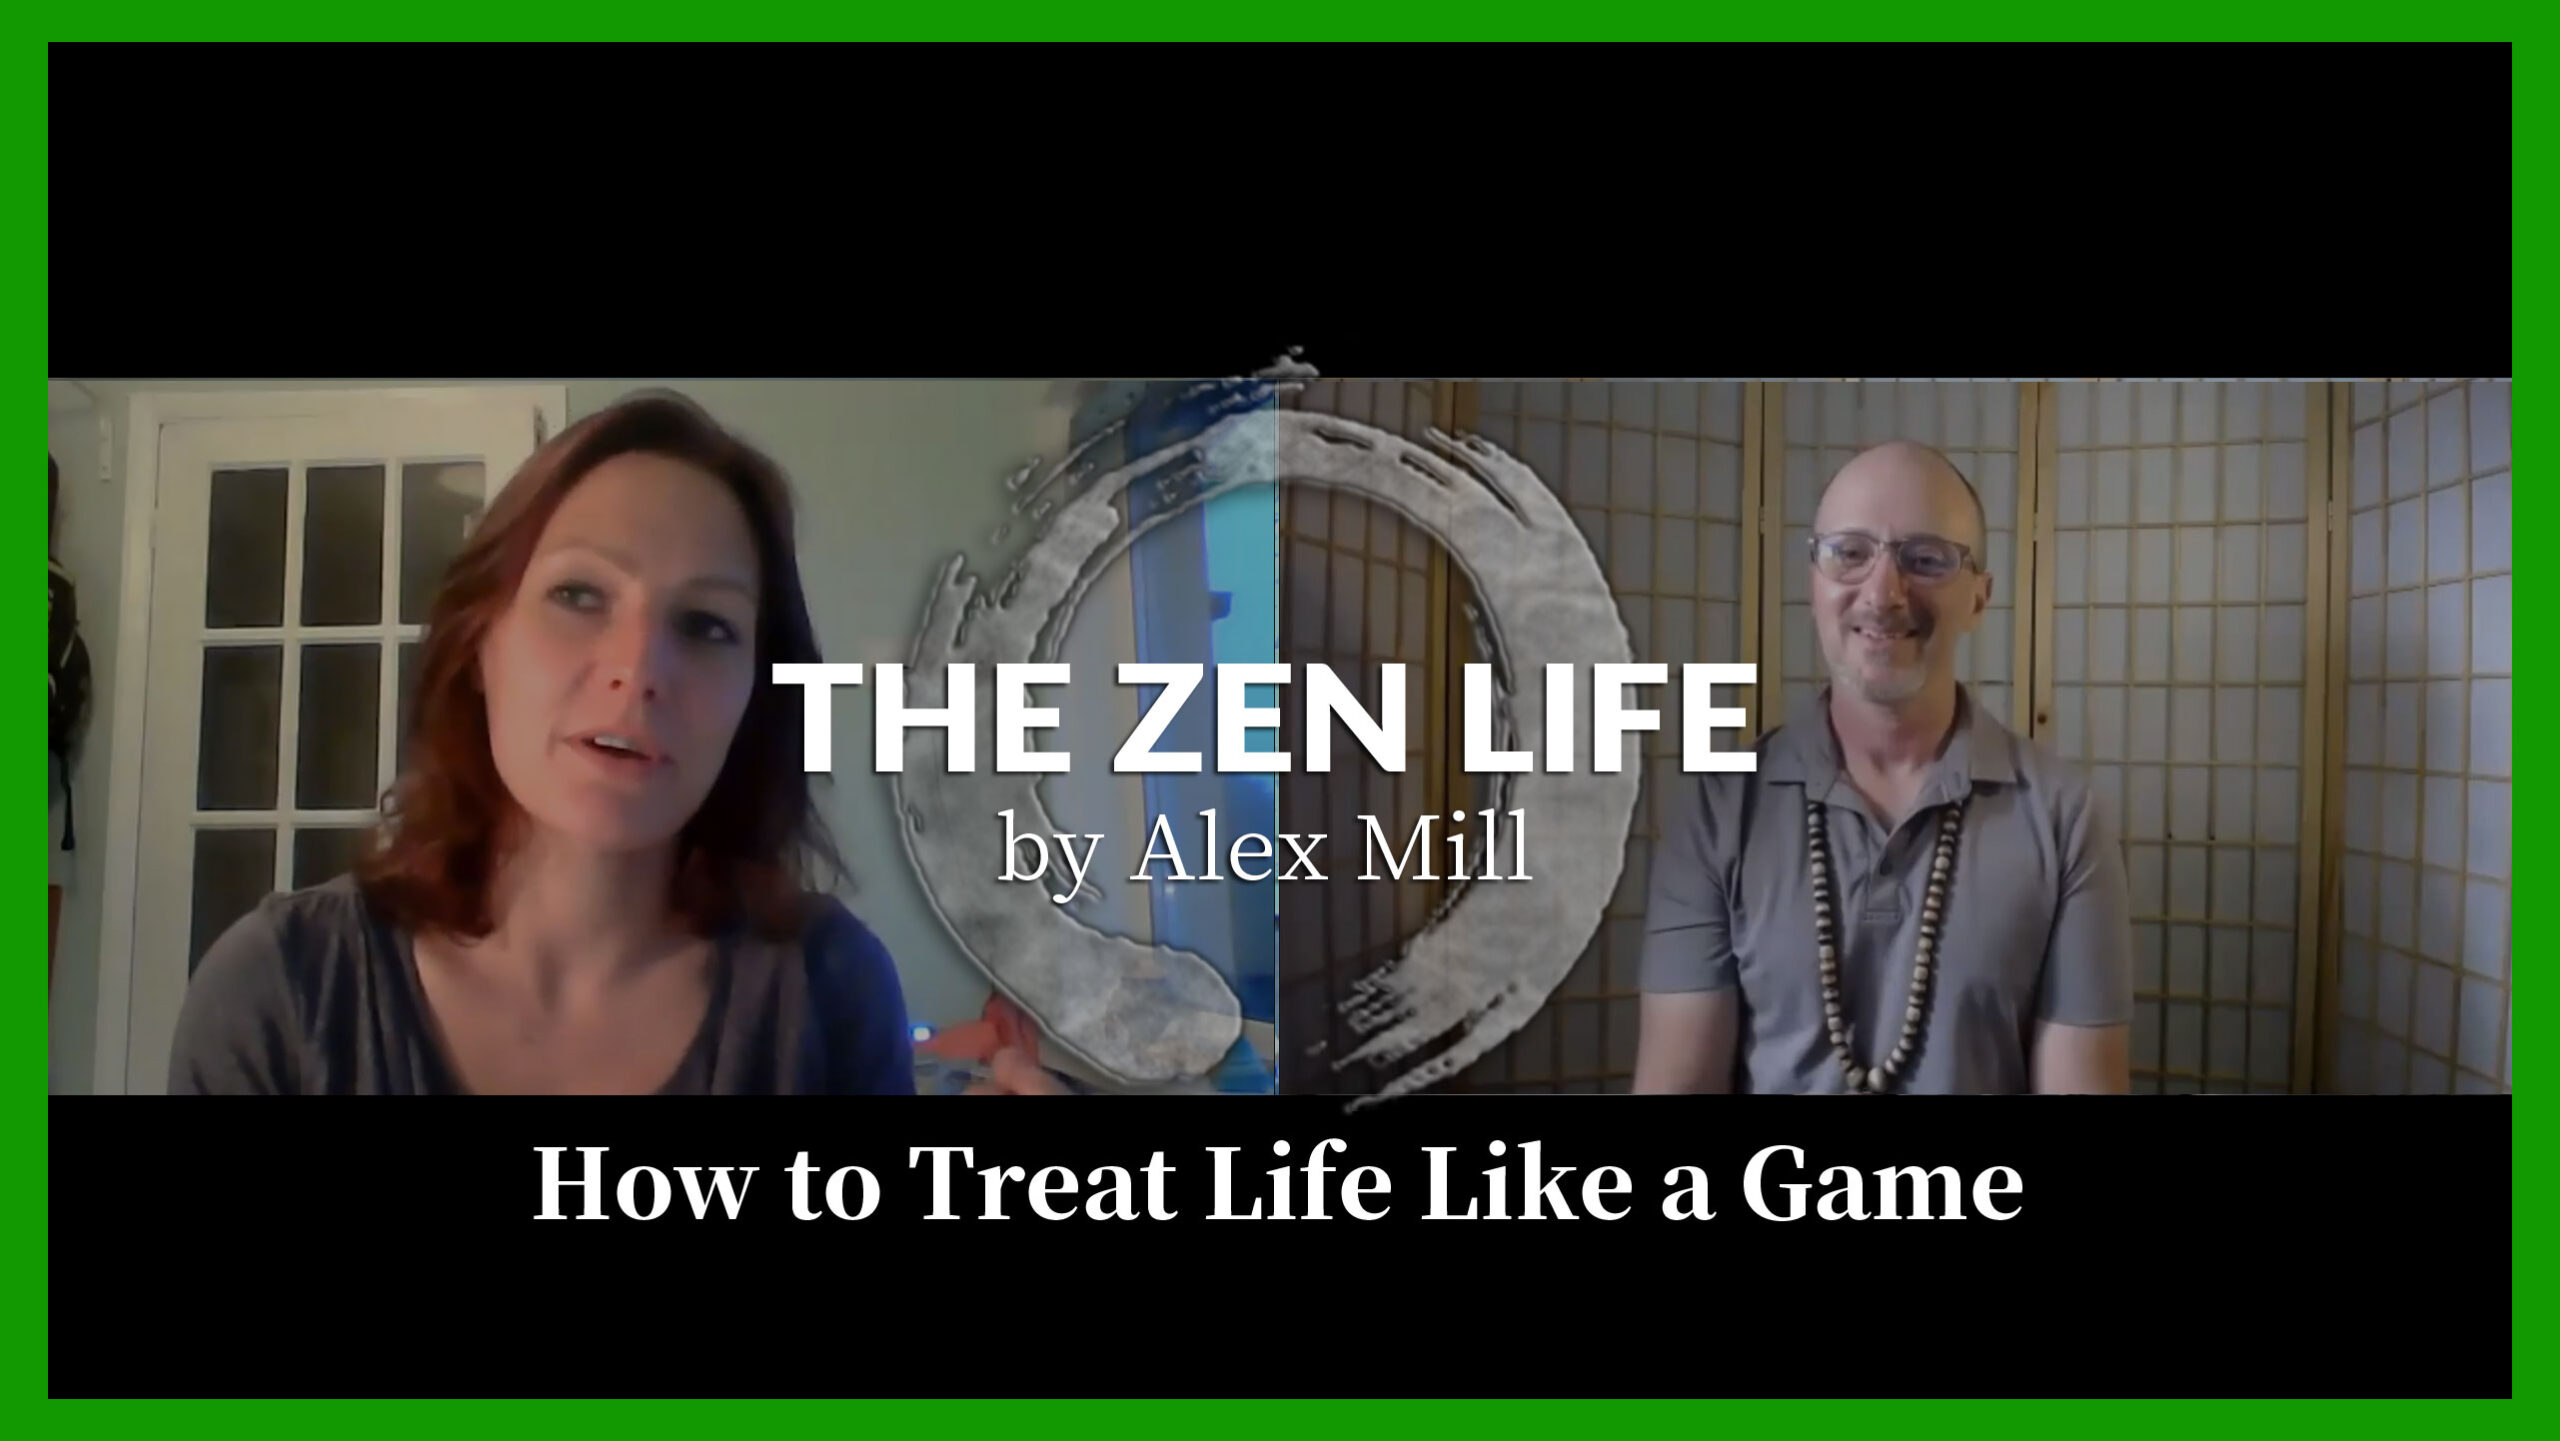 How to Treat Life Like a Game